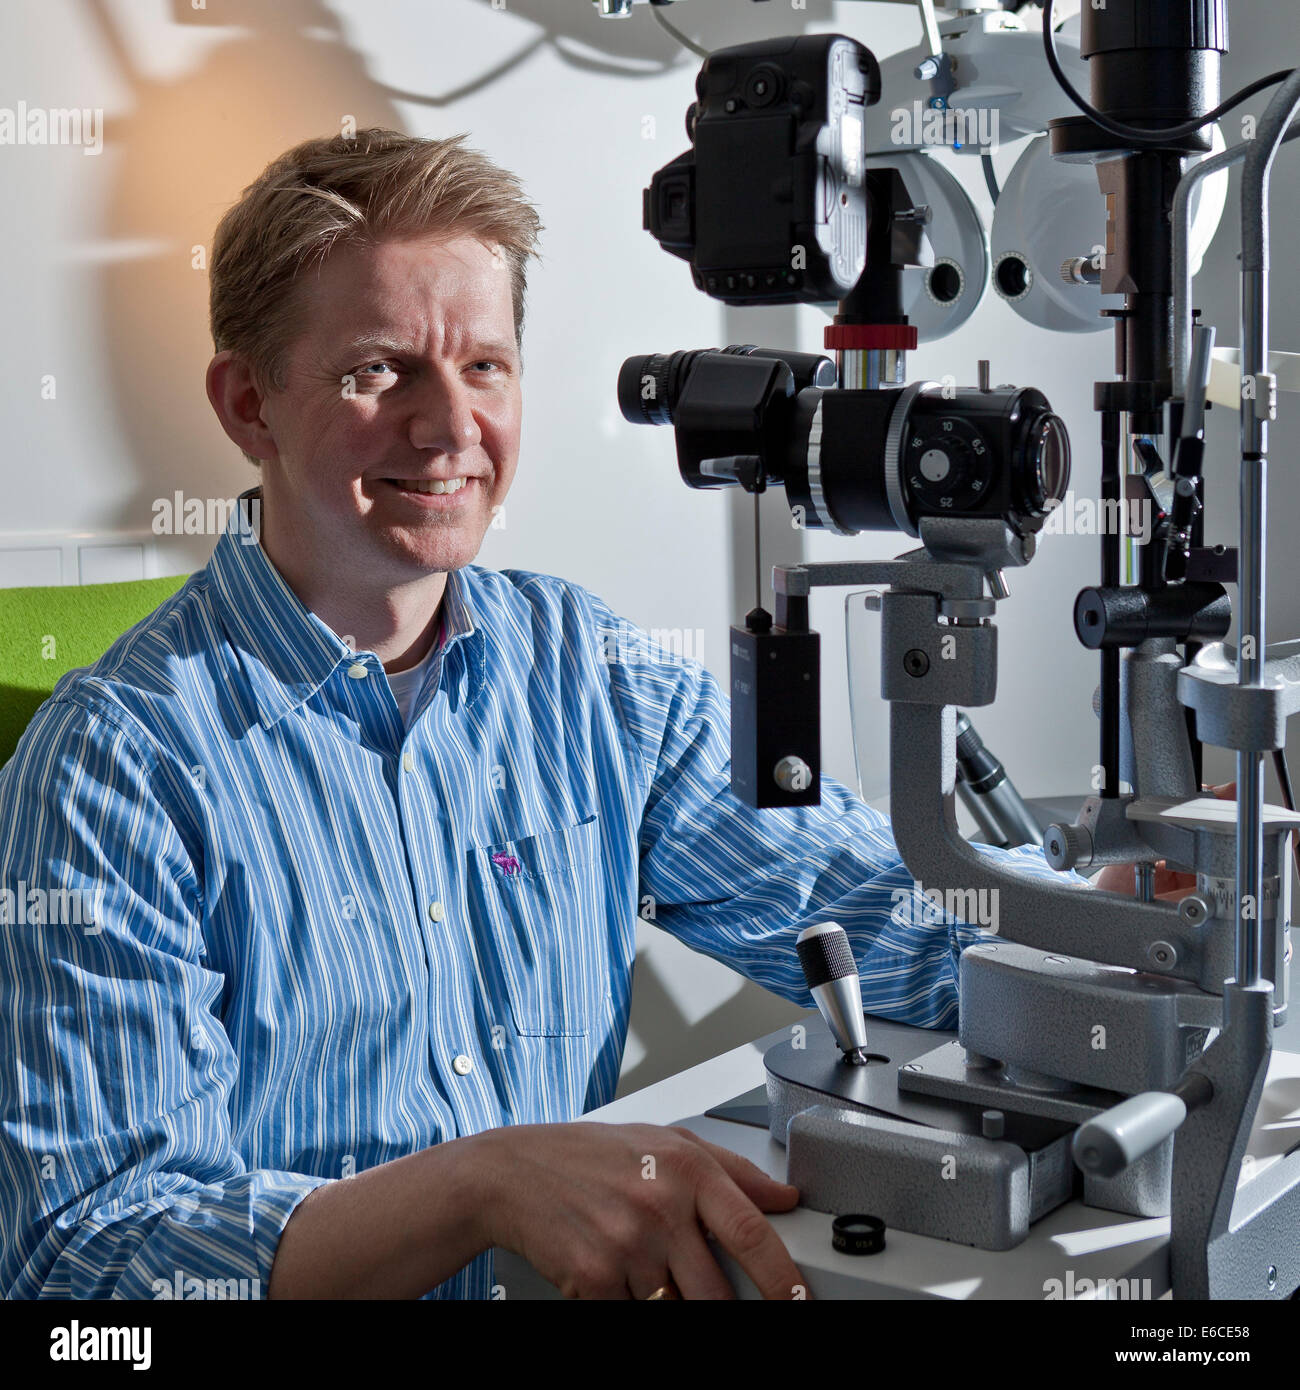 Portrait of doctor with equipment used for Laser (Lasik) eye surgery. Stock Photo